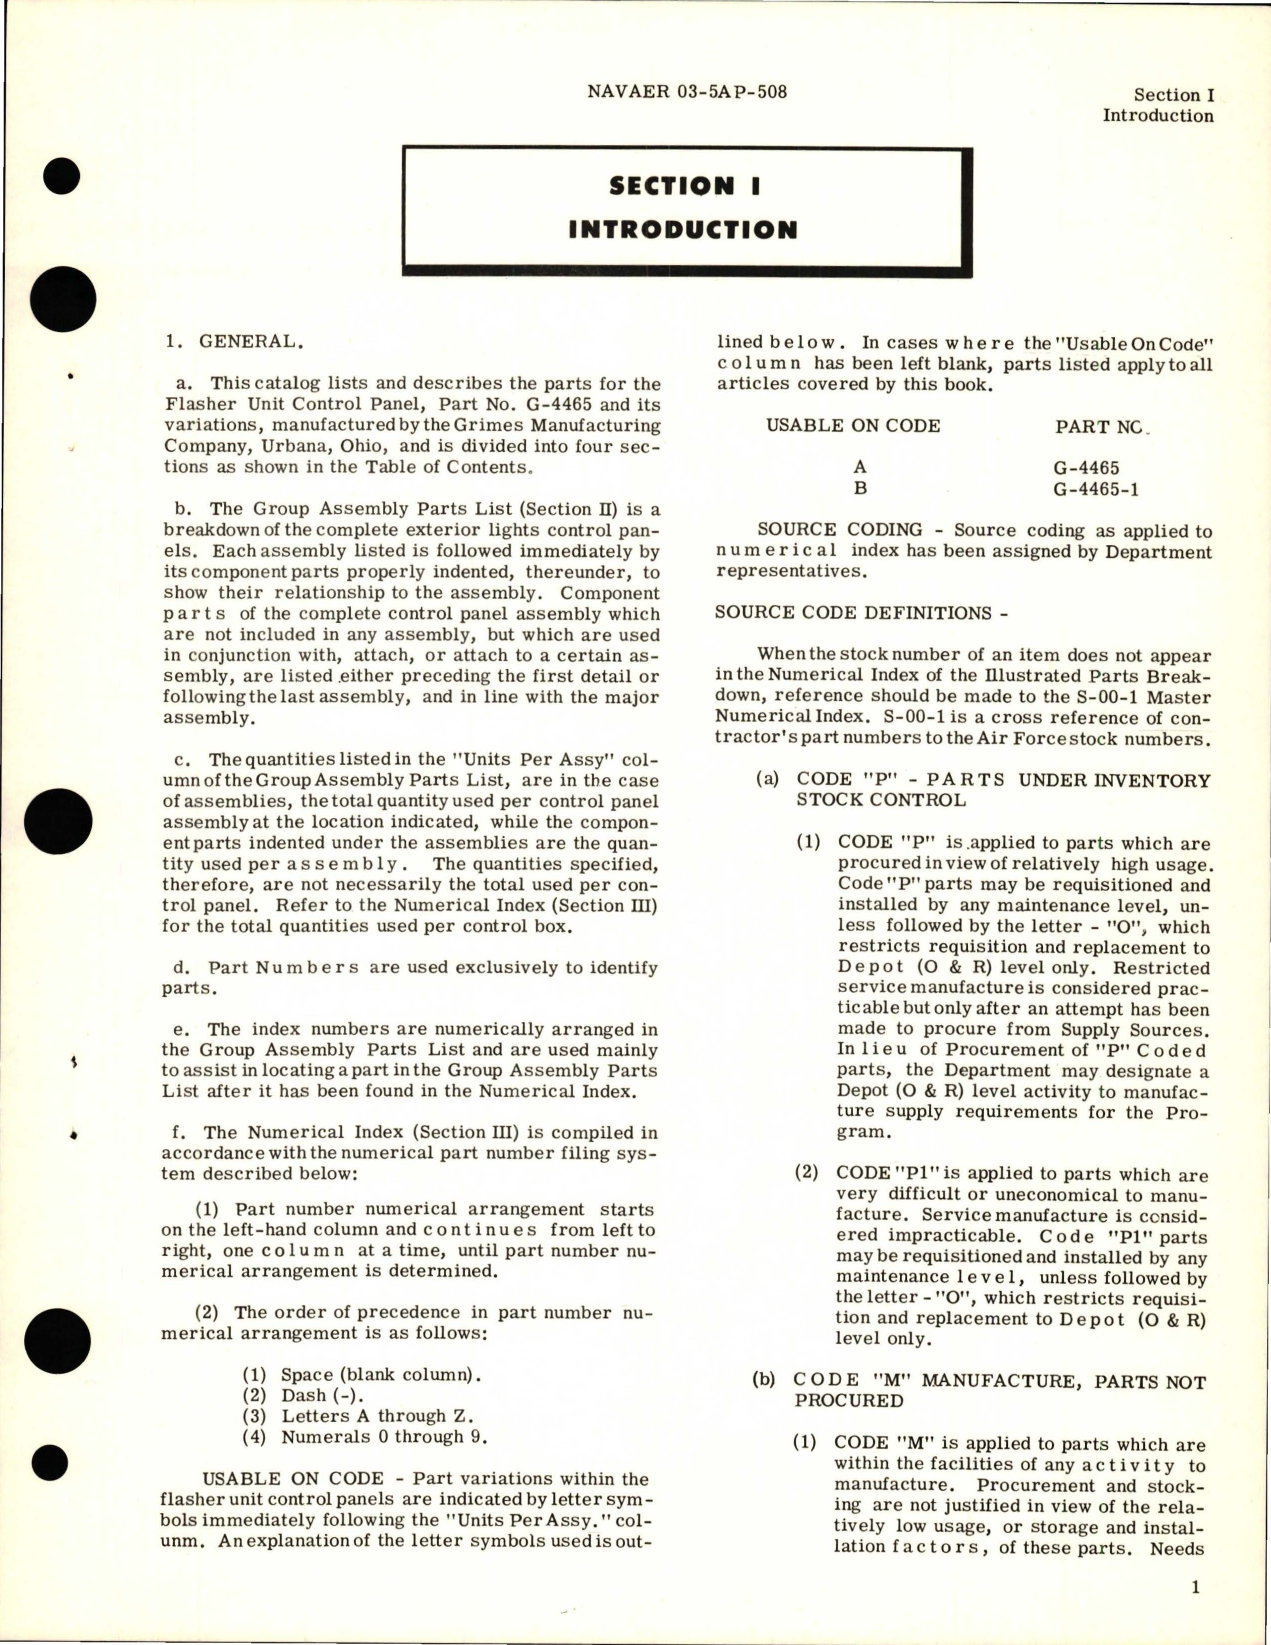 Sample page 5 from AirCorps Library document: Illustrated Parts Breakdown for Flasher Unit Control Panel Assembly - Part G-4465